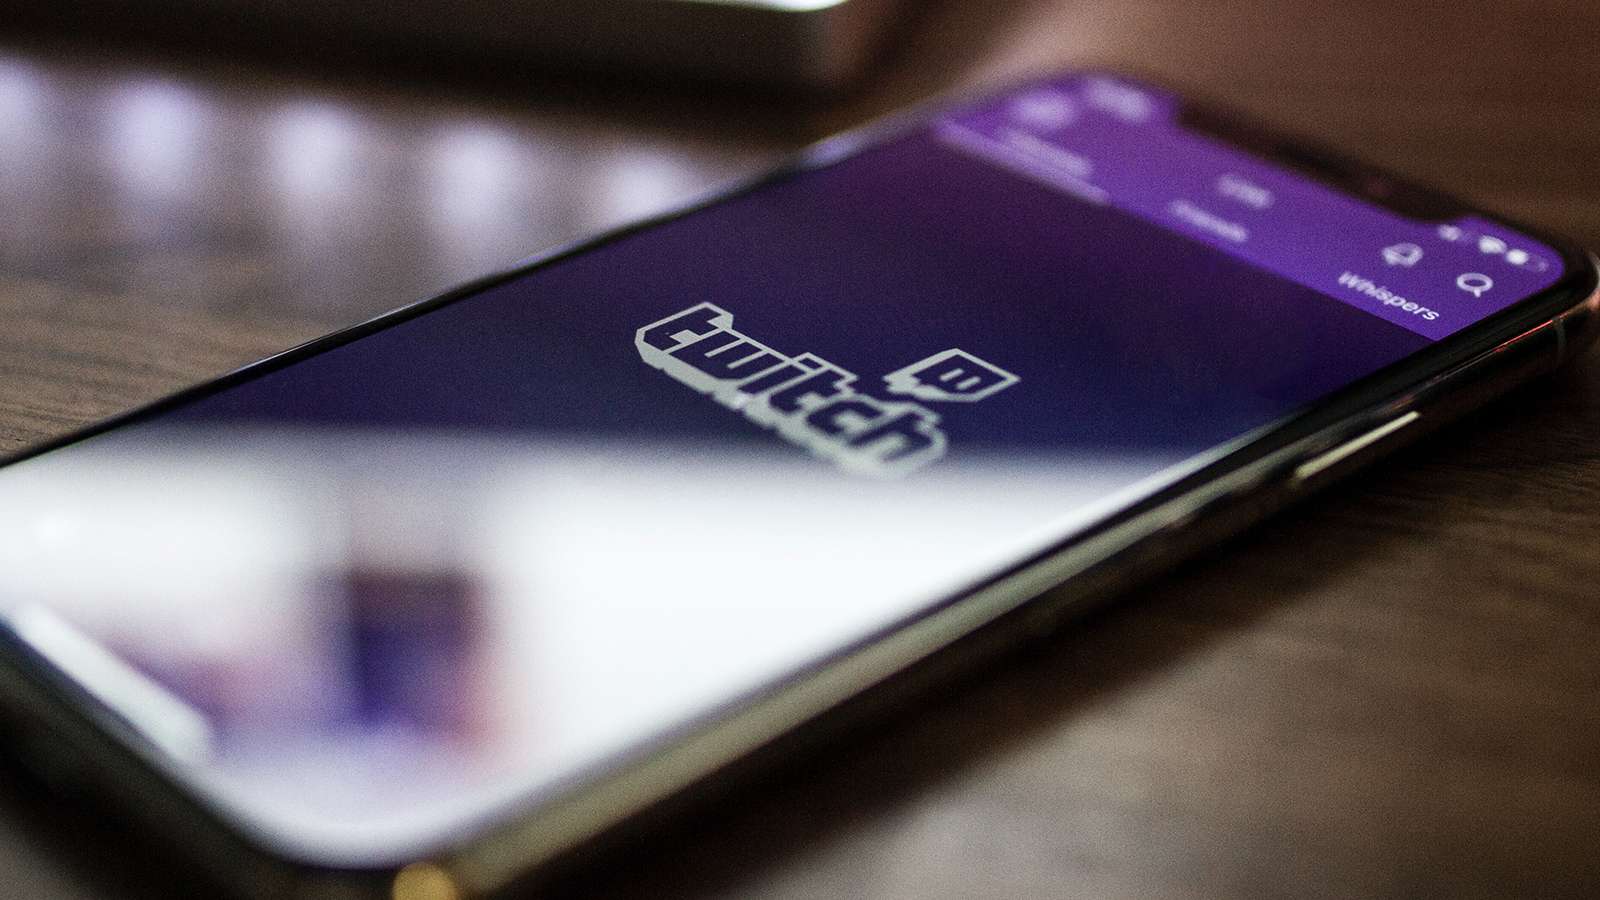 The Twitch app is shown on a smart phone.